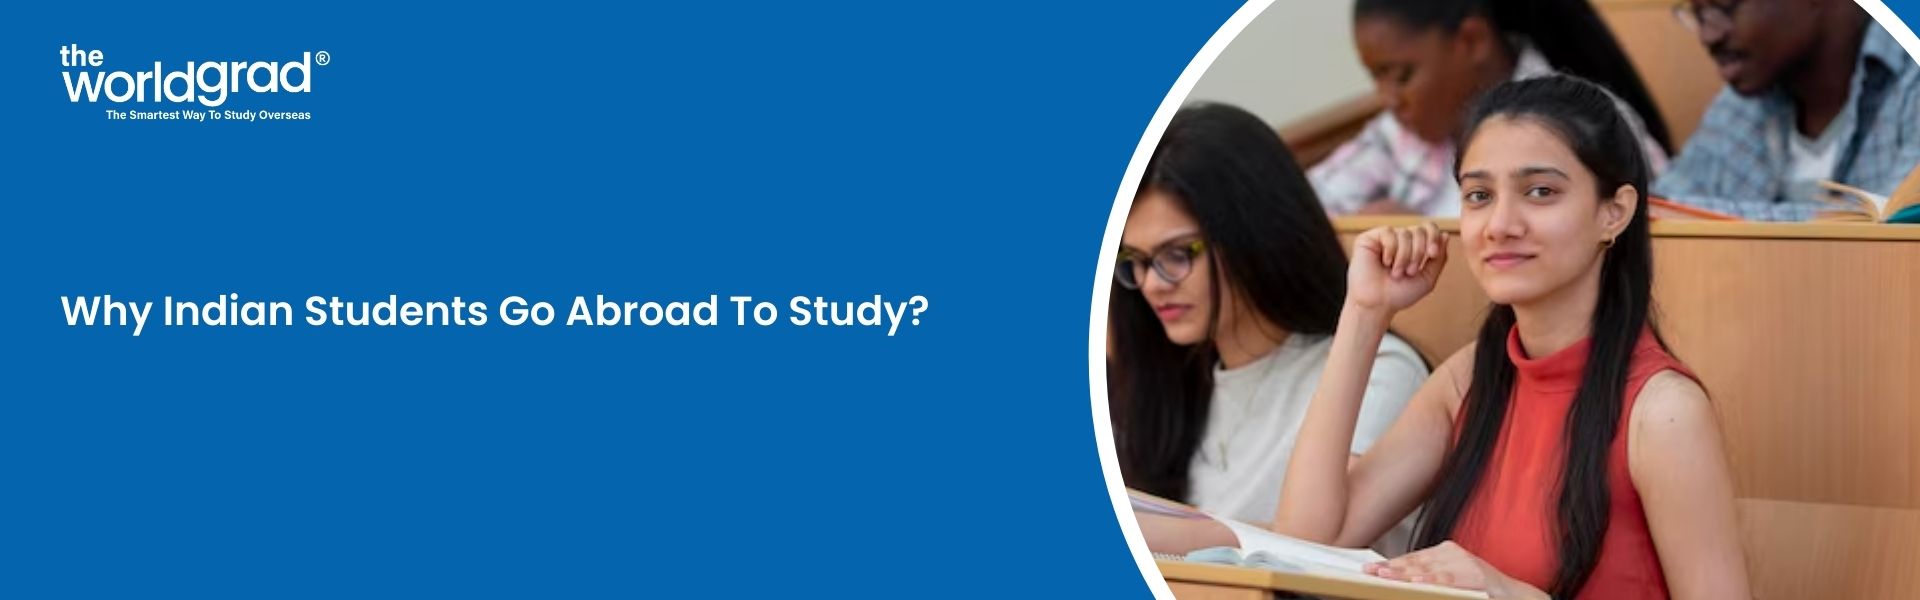 Why Indian Students Go Abroad To Study?